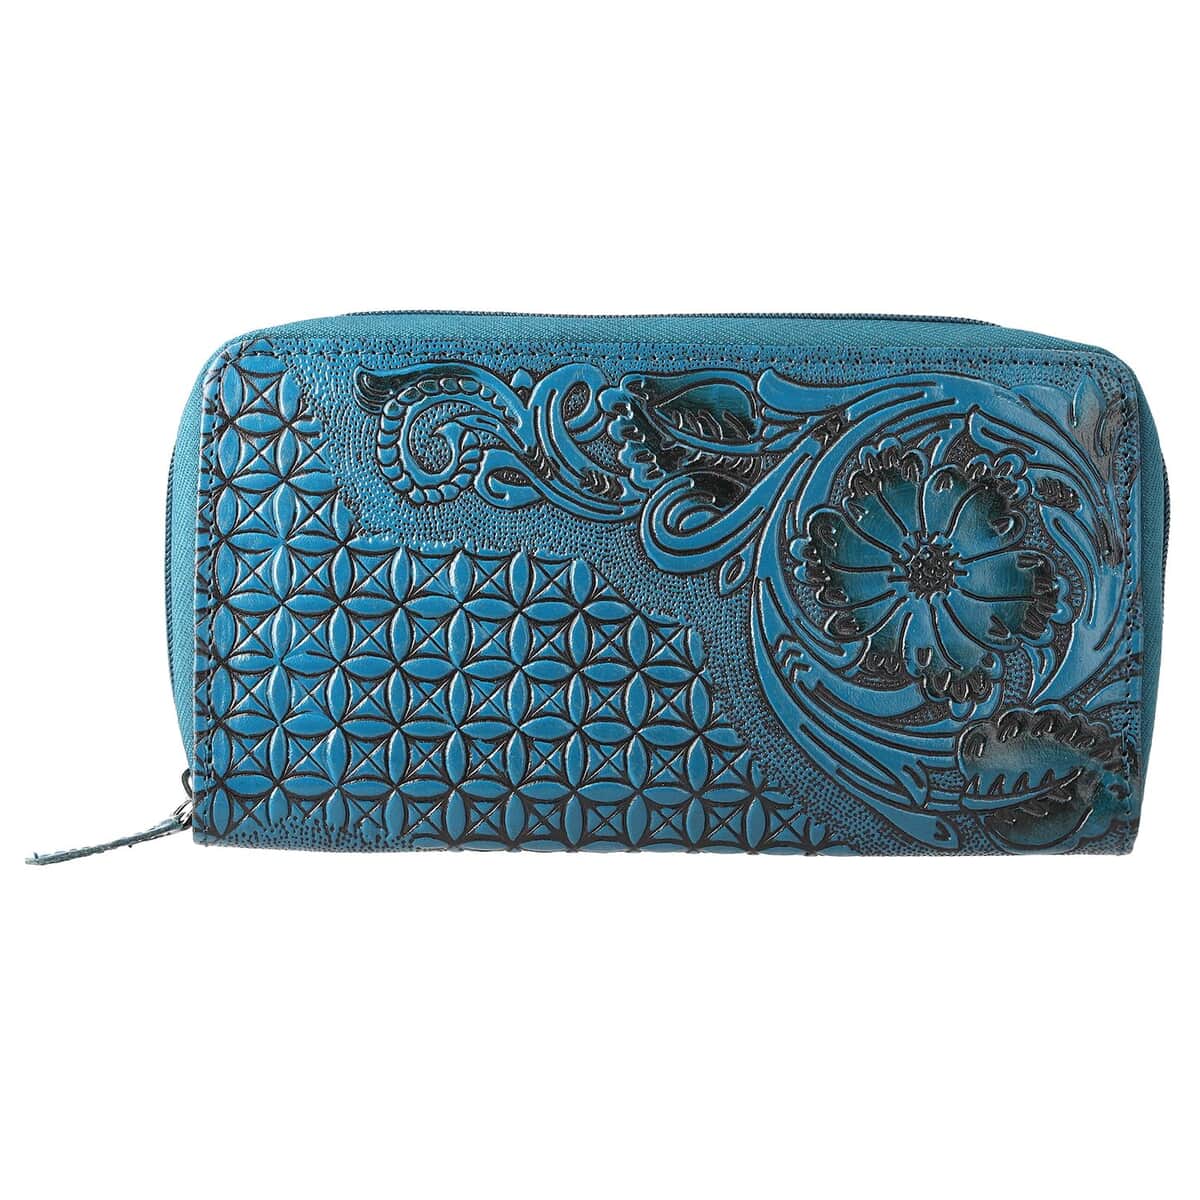 "RFID Protected hand floral embossed Leather Women's Wallet  SIZE: 8(L)x1(W)x4.25(H) inches COLOR: Green" image number 3